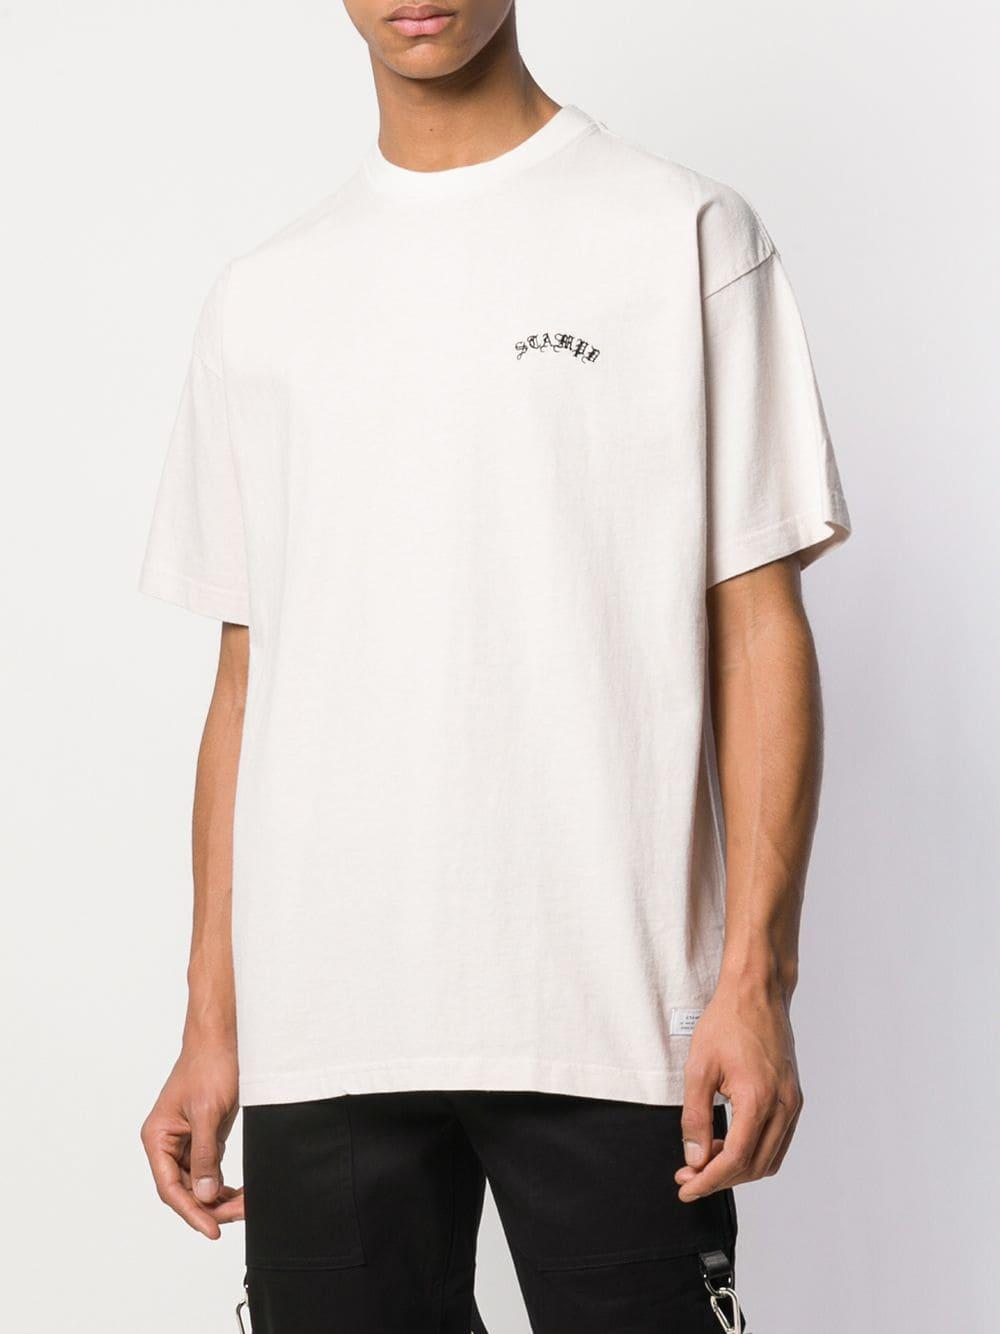 Stampd Cotton Graphic Print T-shirt in White for Men - Lyst